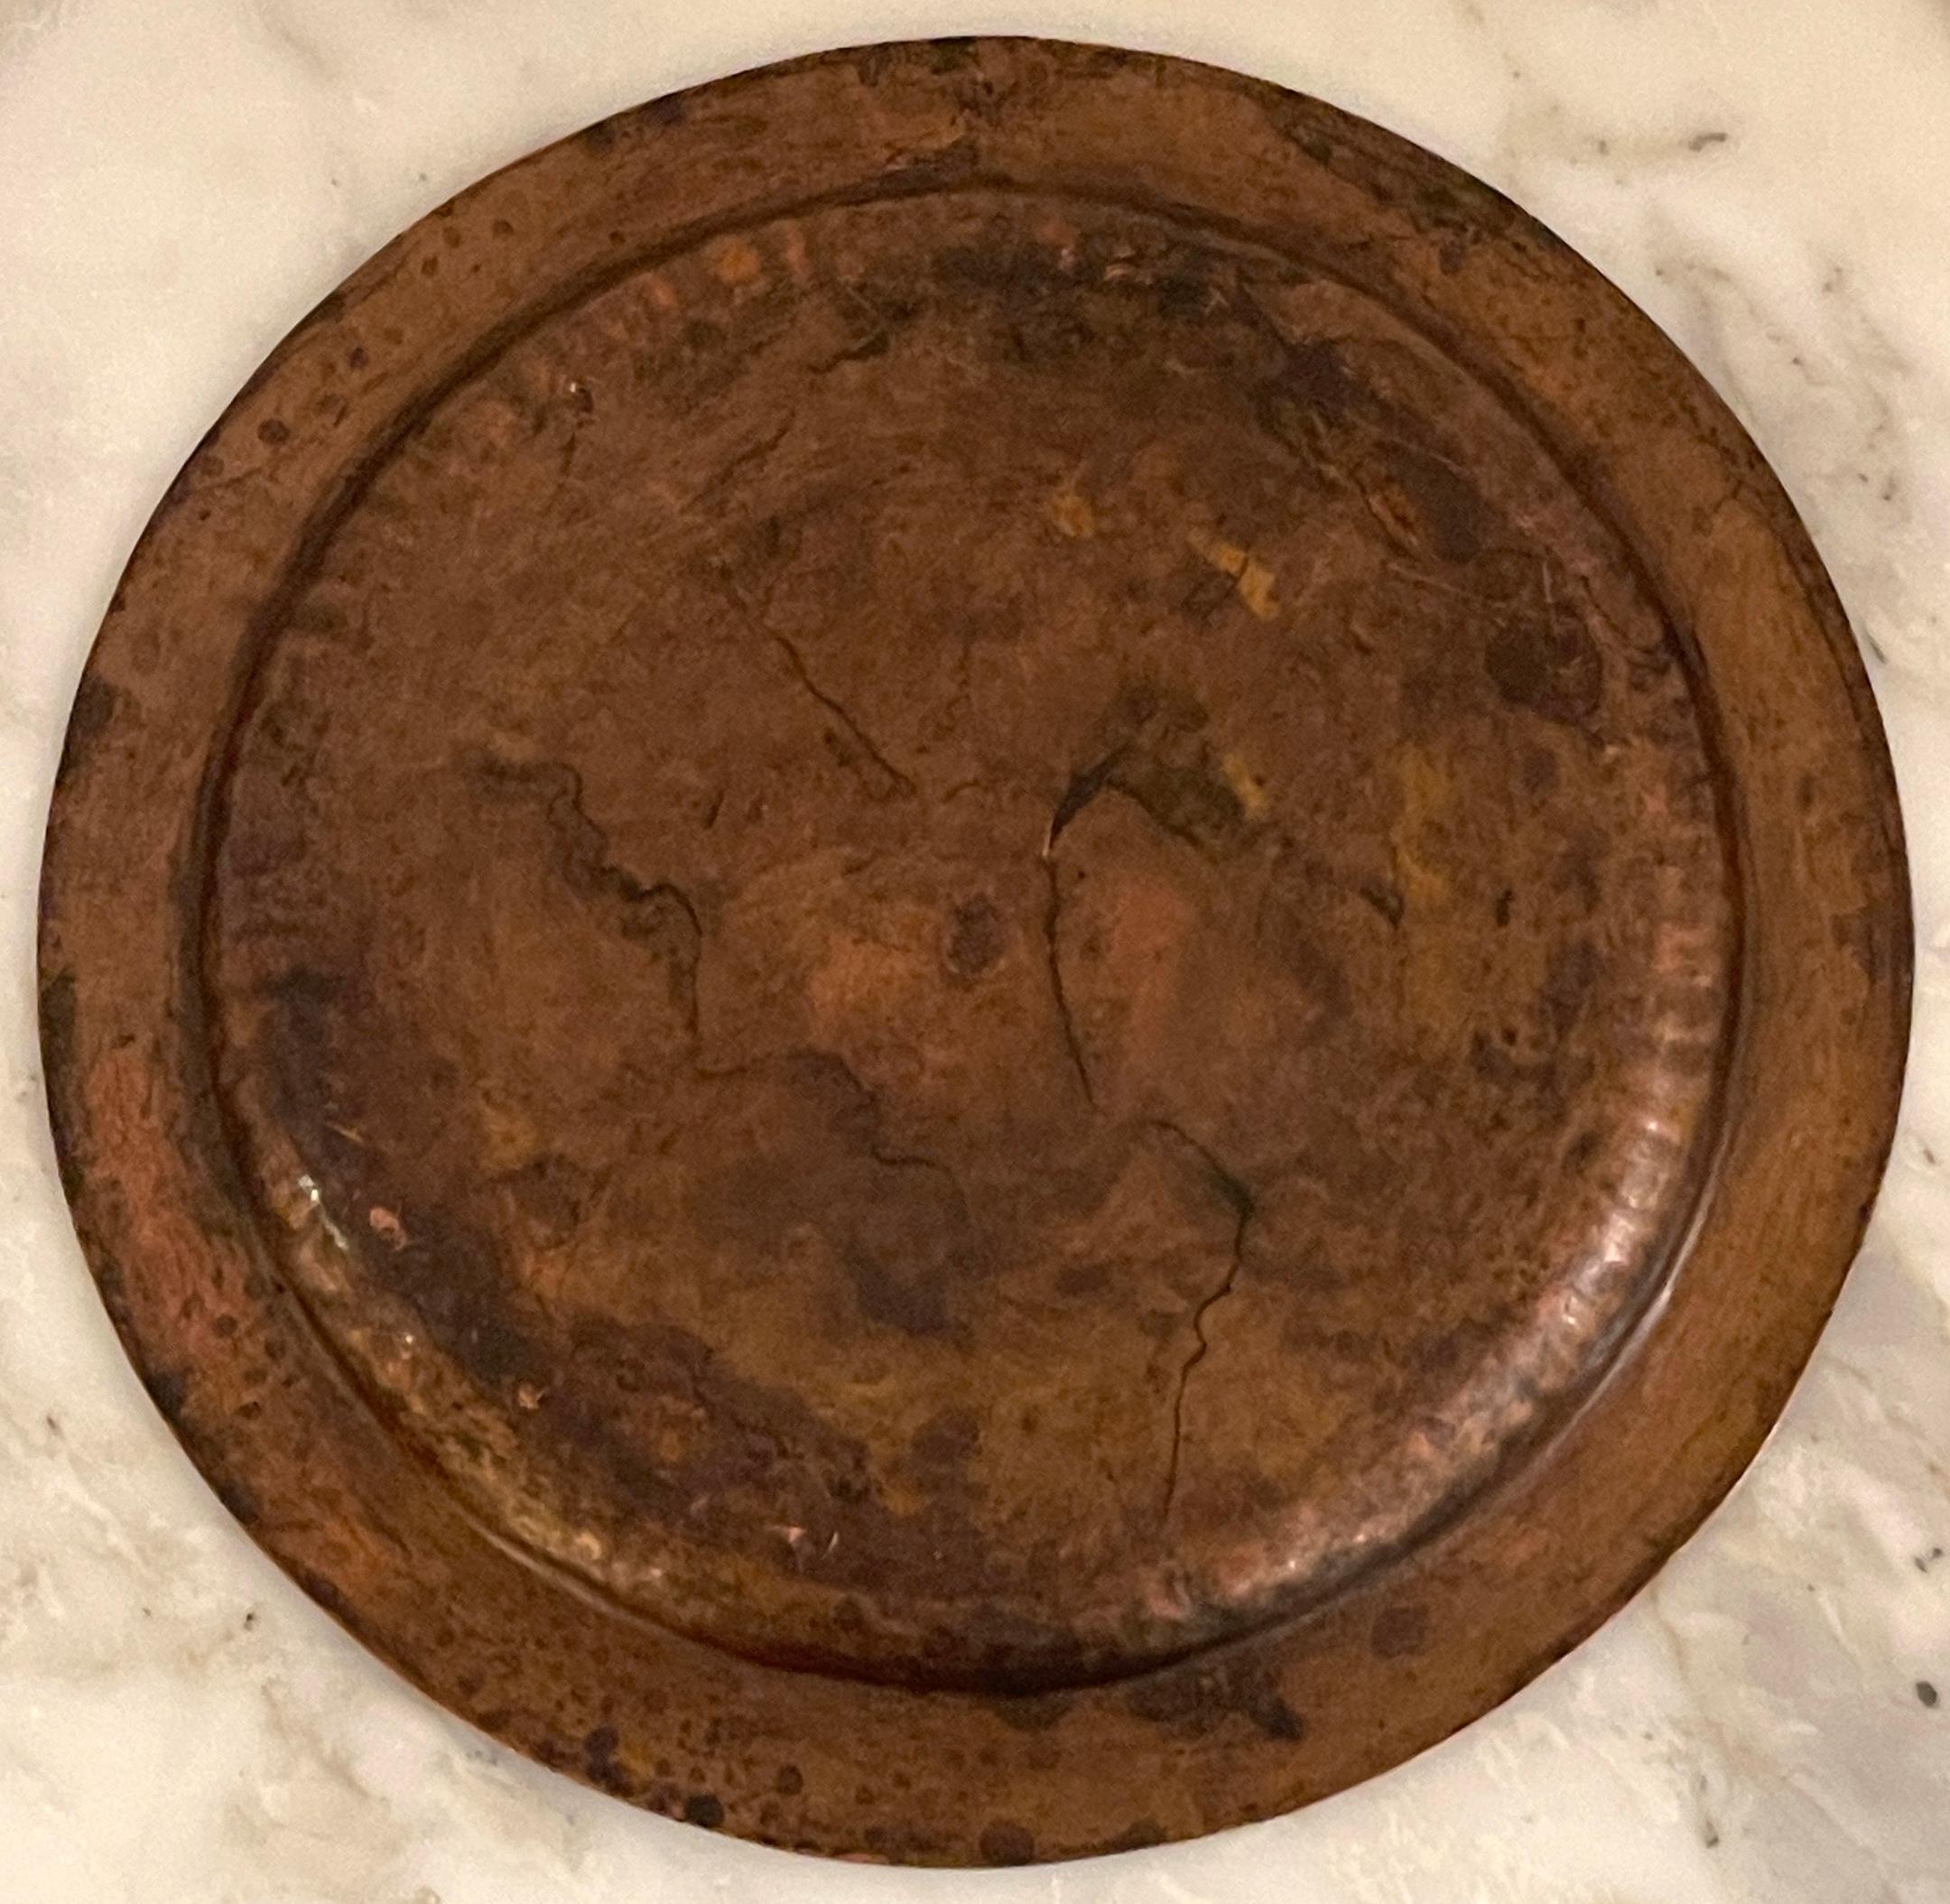 Arts and Crafts Roycroft Arts & Crafts Copper Round Salver/Tray, Roycroft Inn at East Aurora NY For Sale